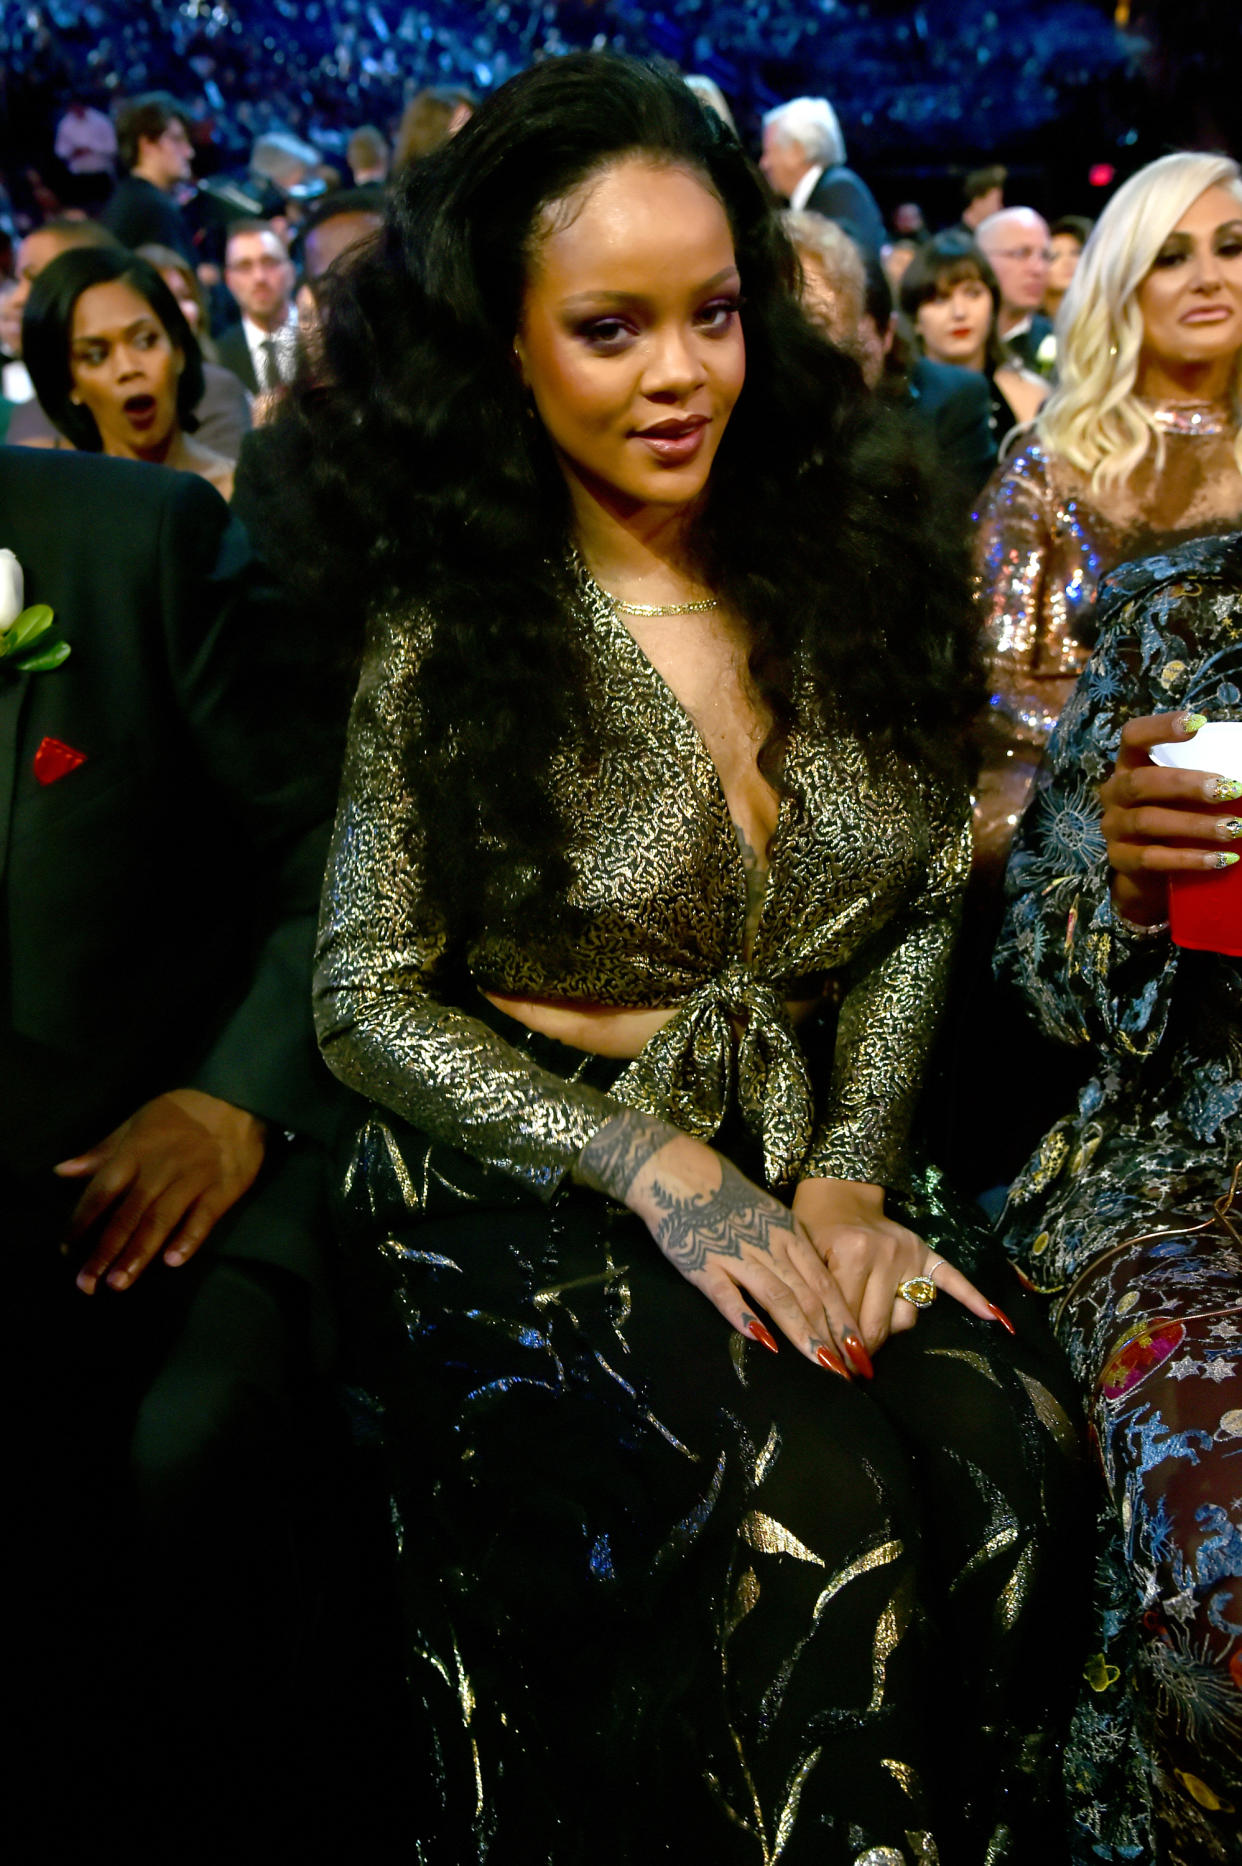 Rihanna at the Grammys in January 2018. (Photo by Kevin Mazur/Getty Images for NARAS)